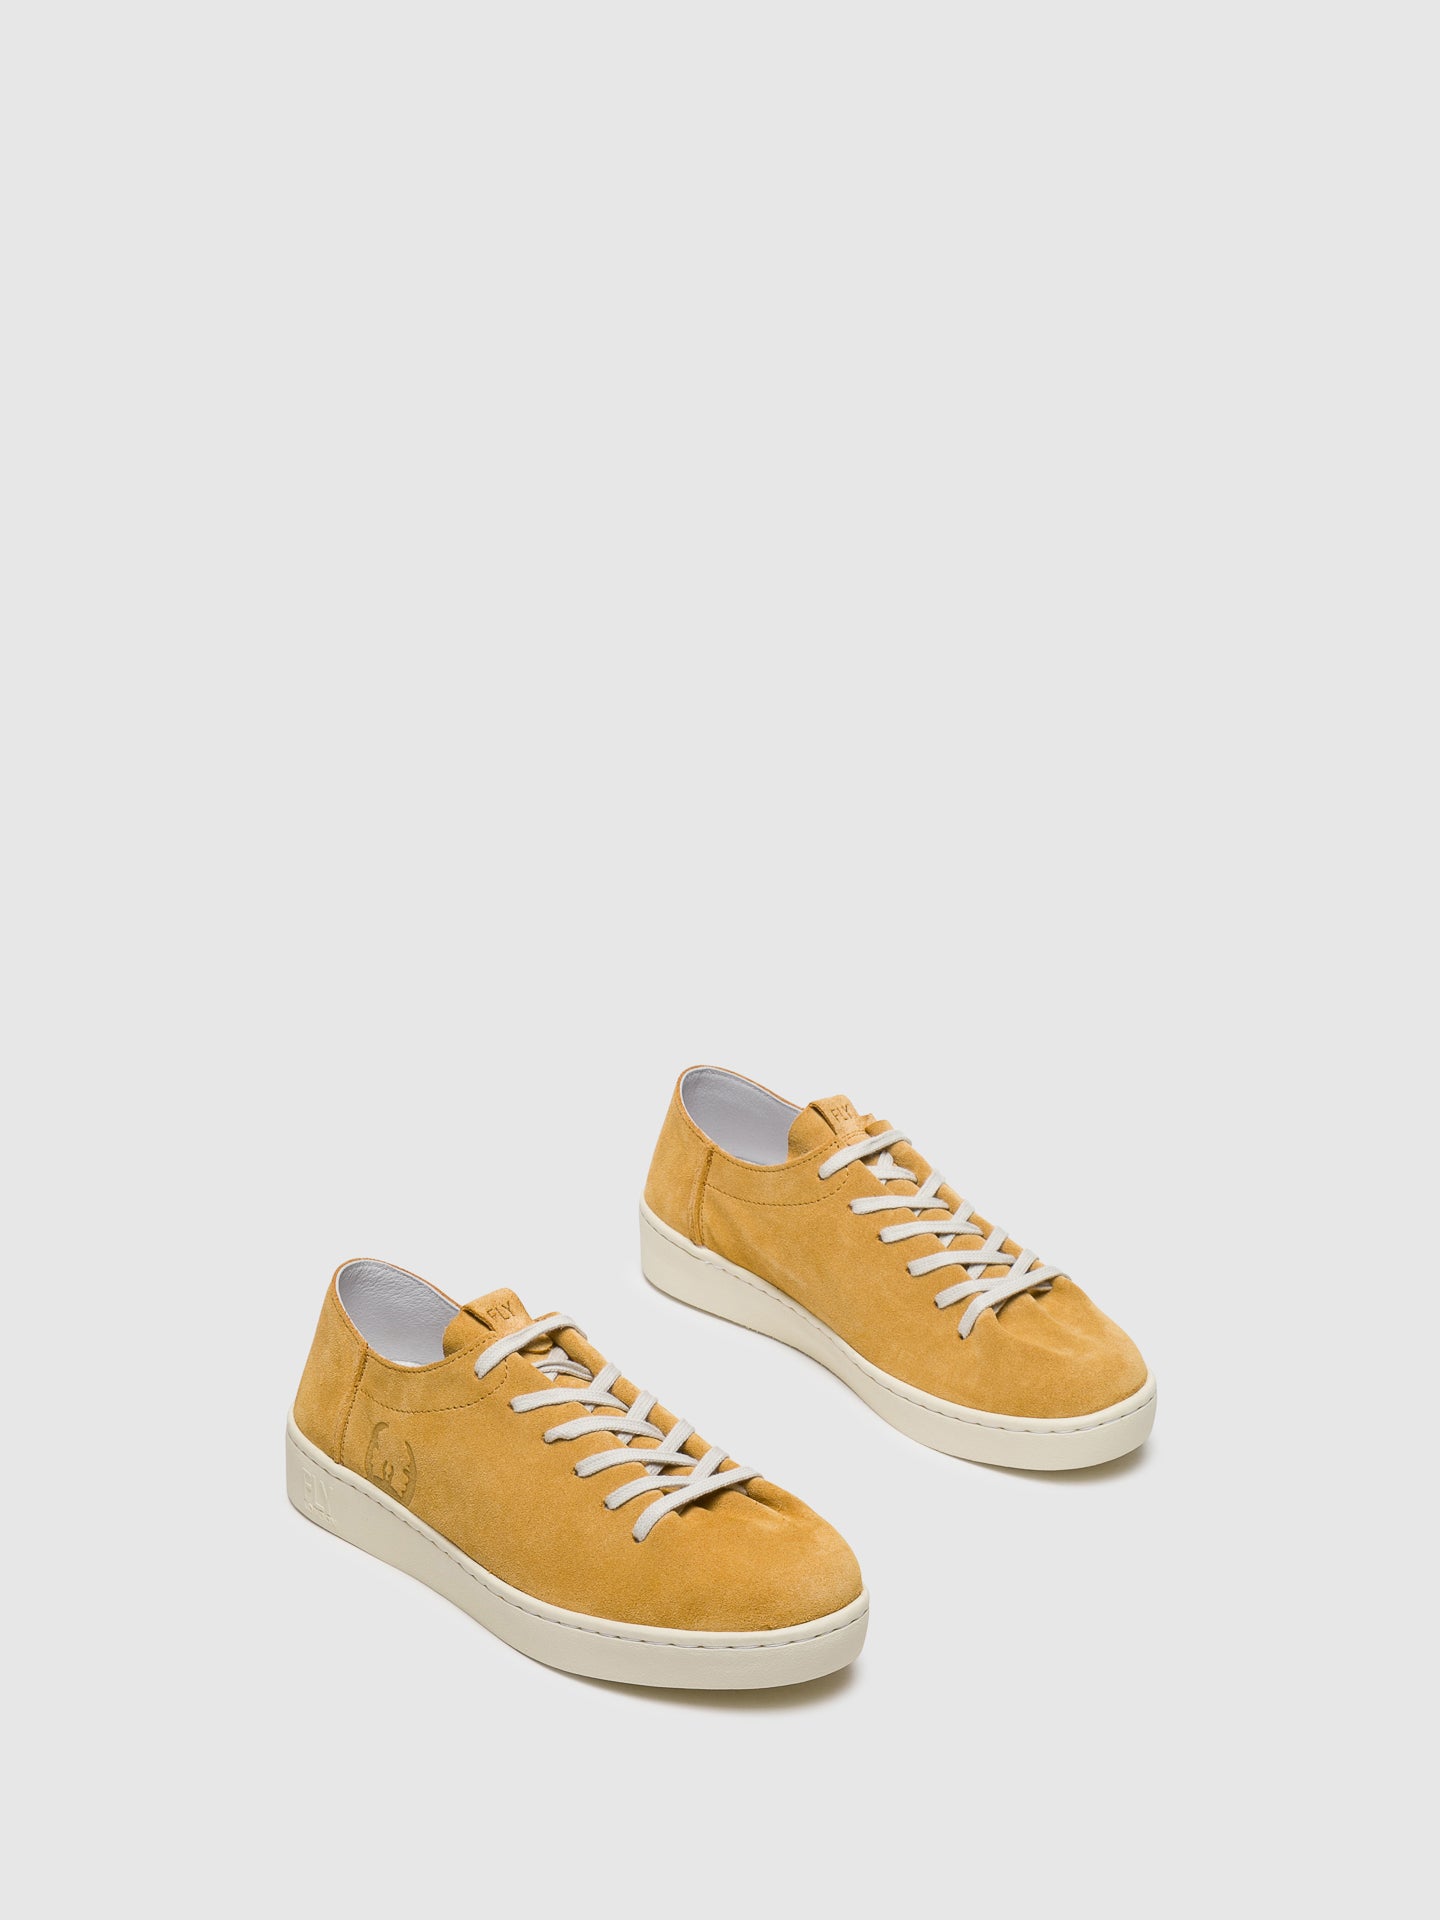 Fly London Yellow Lace-up Trainers